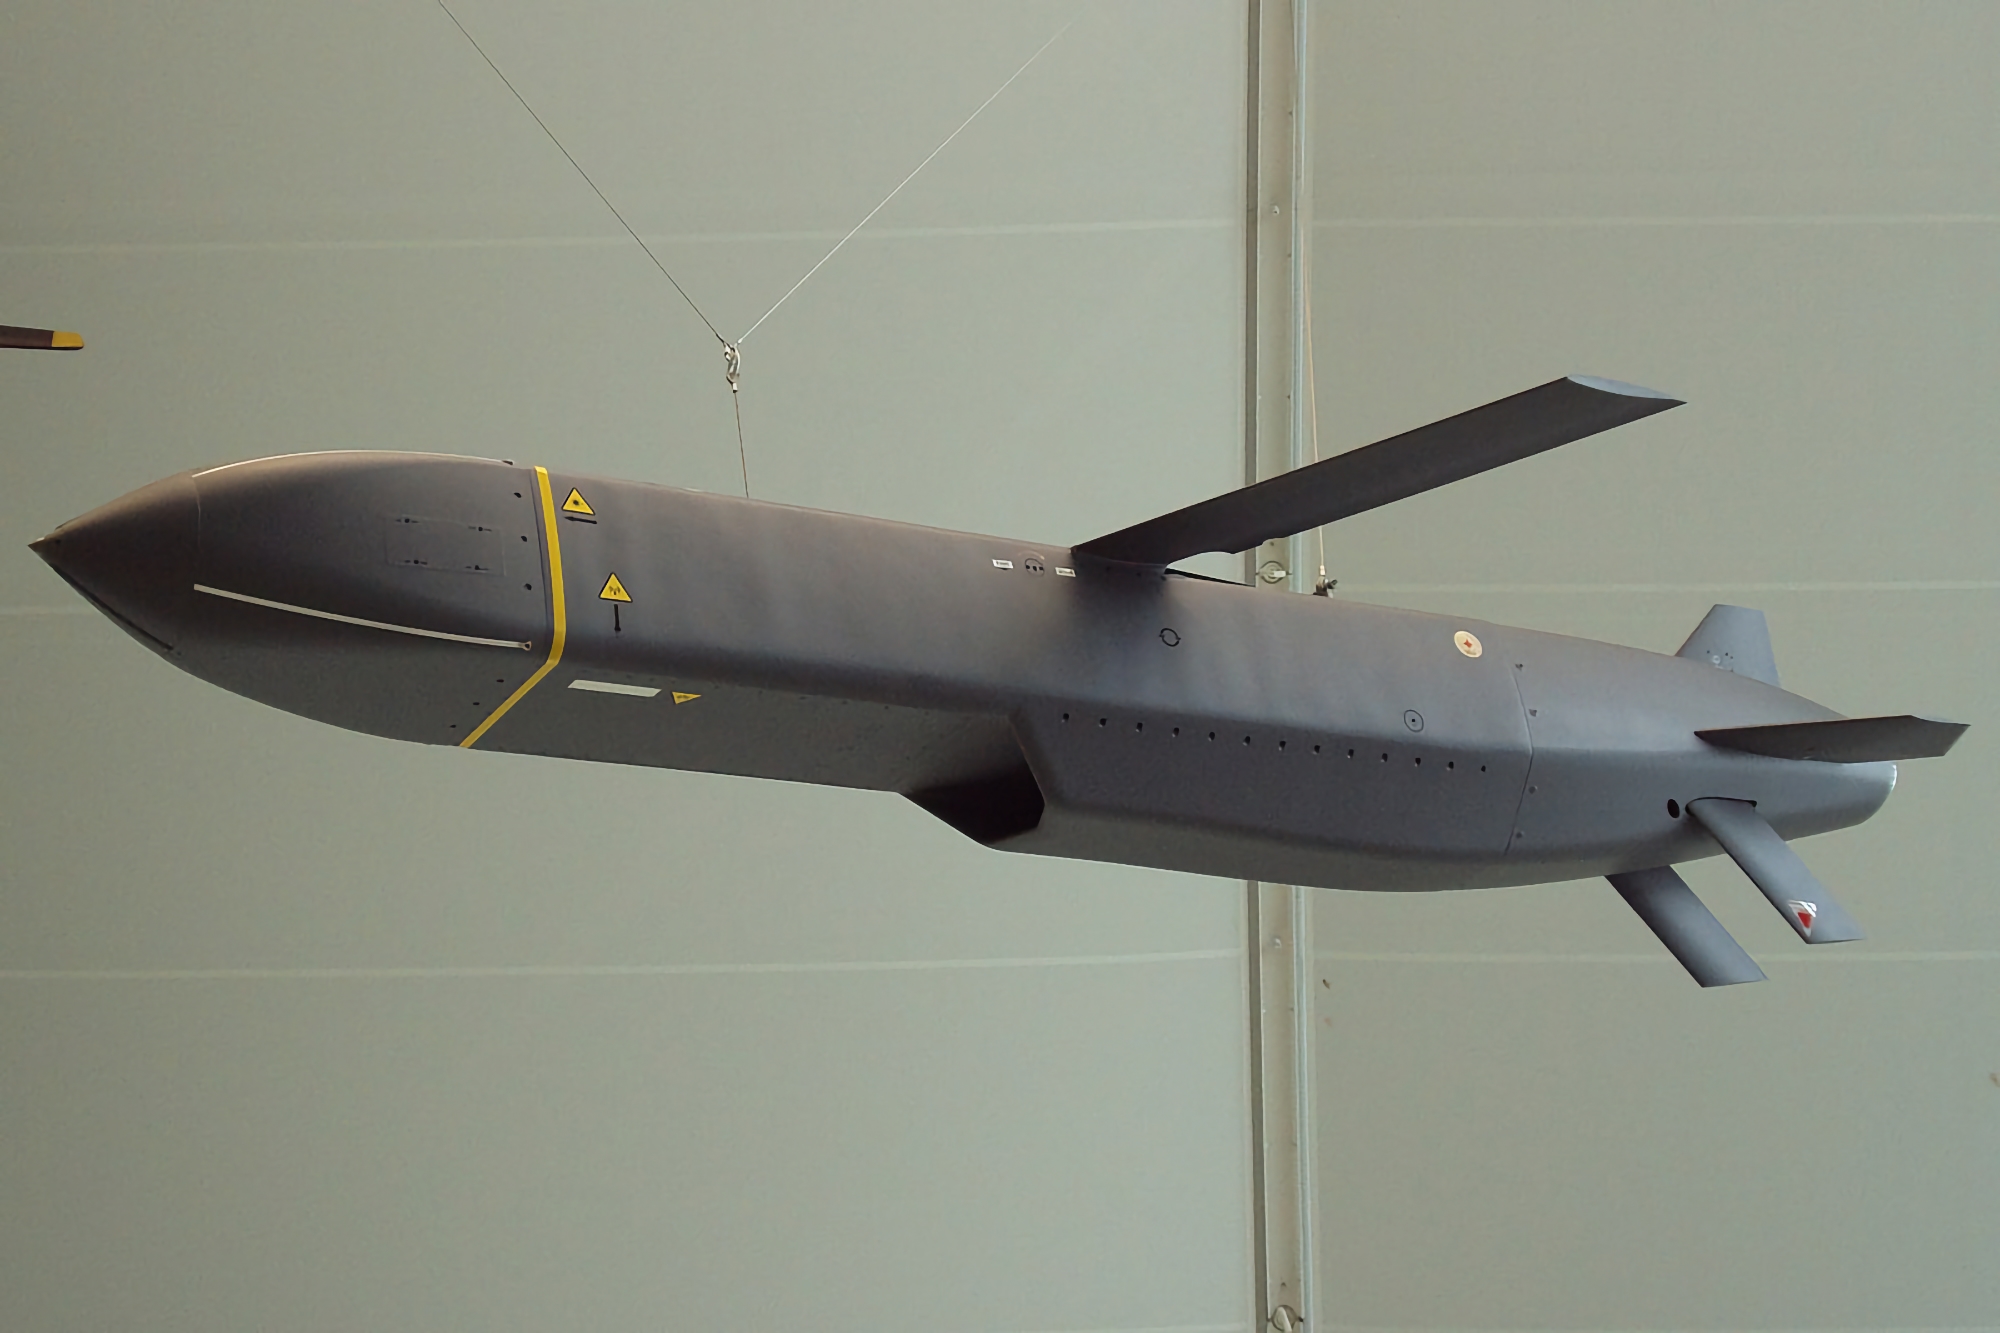 It's official: Britain hands Ukraine Storm Shadow cruise missiles with a range of around 300km